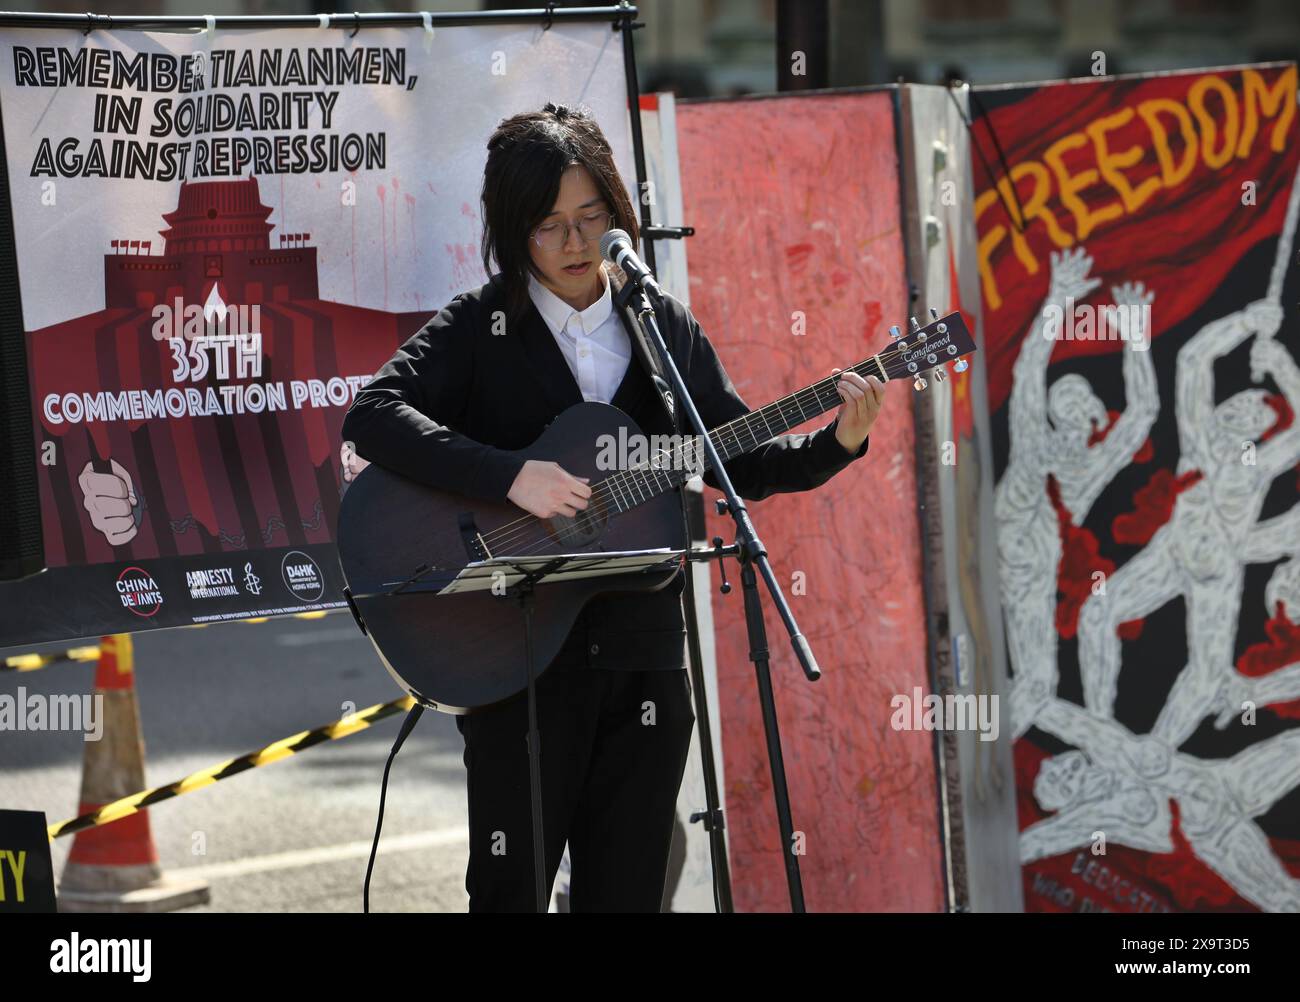 June 2, 2024, London, England, UK: A young musician sings a song with the backdrop of a ''˜Freedom' banner, during the demonstration in Parliament Square. The event commemorated the1989 student-led protests and the Chinese government's bloody crackdown on 4 June, as well as protest against China's current clampdown on freedom of speech - including its increasing repression of Tibetans and Uyghurs, its crushing of dissent in Hong Kong, and the intimidation of Chinese and Hong Kong students in the UK, Europe and North America. Thirty-five years on, the Chinese authorities still ban information Stock Photo